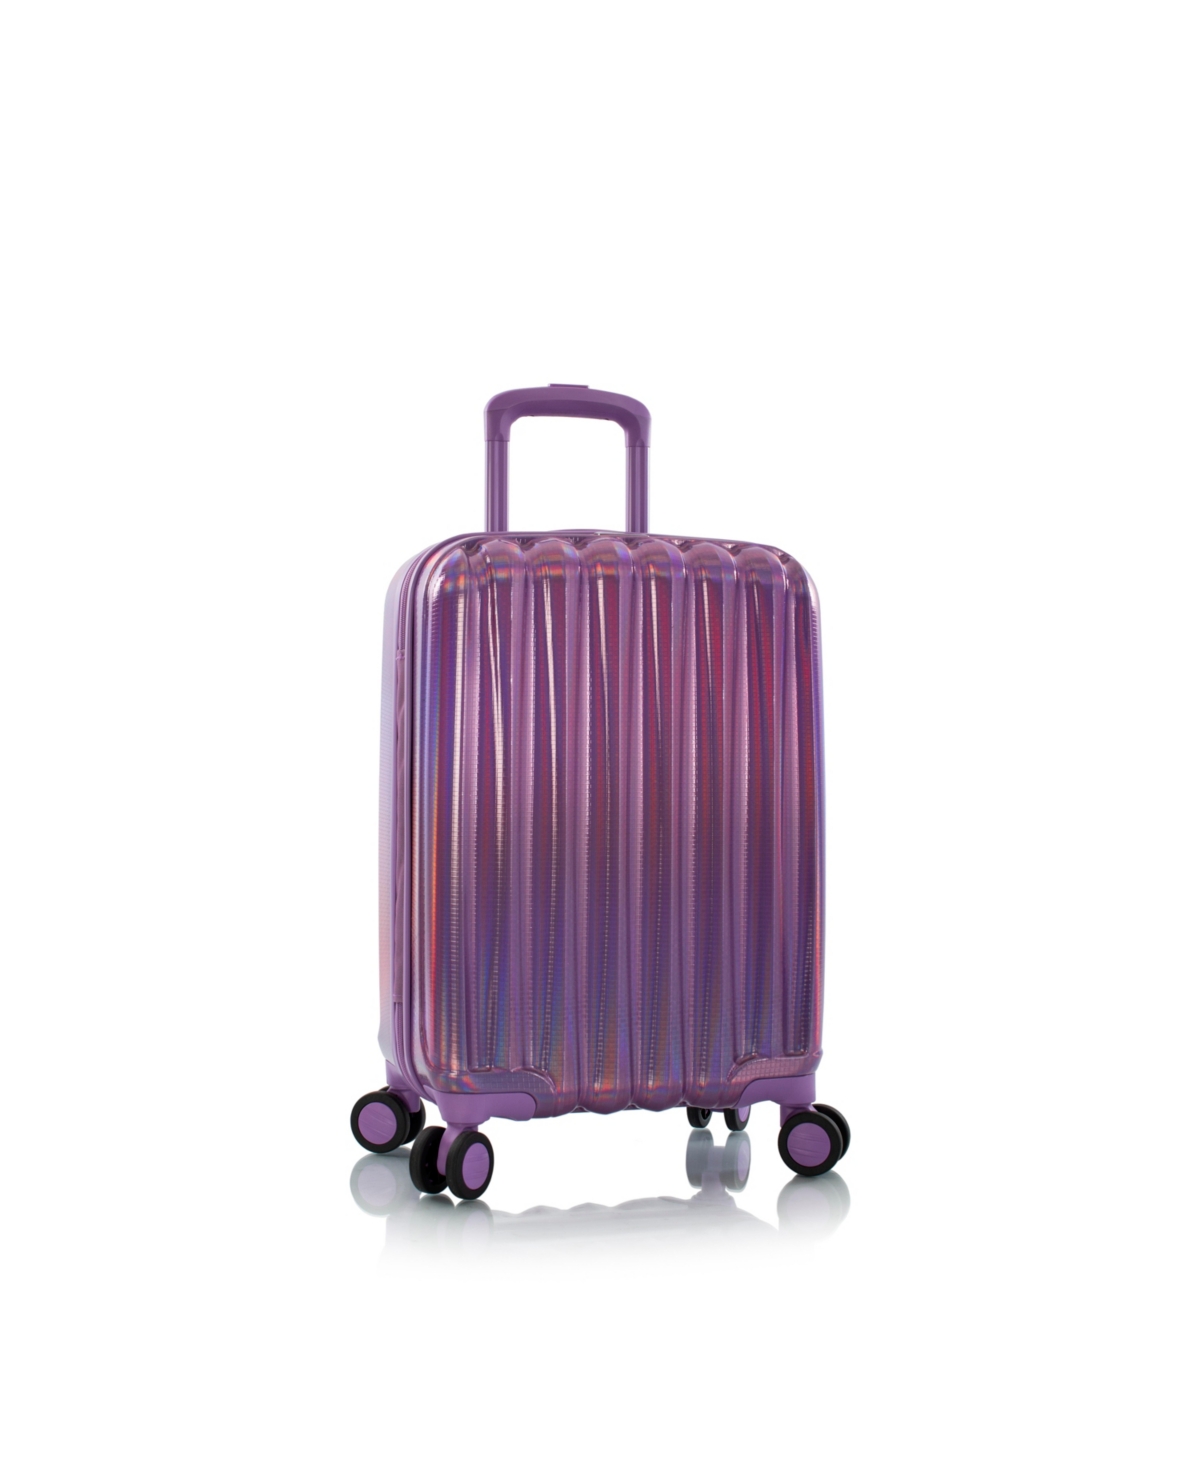 Astro 21" Hardside Carry-On Spinner Luggage - Purple